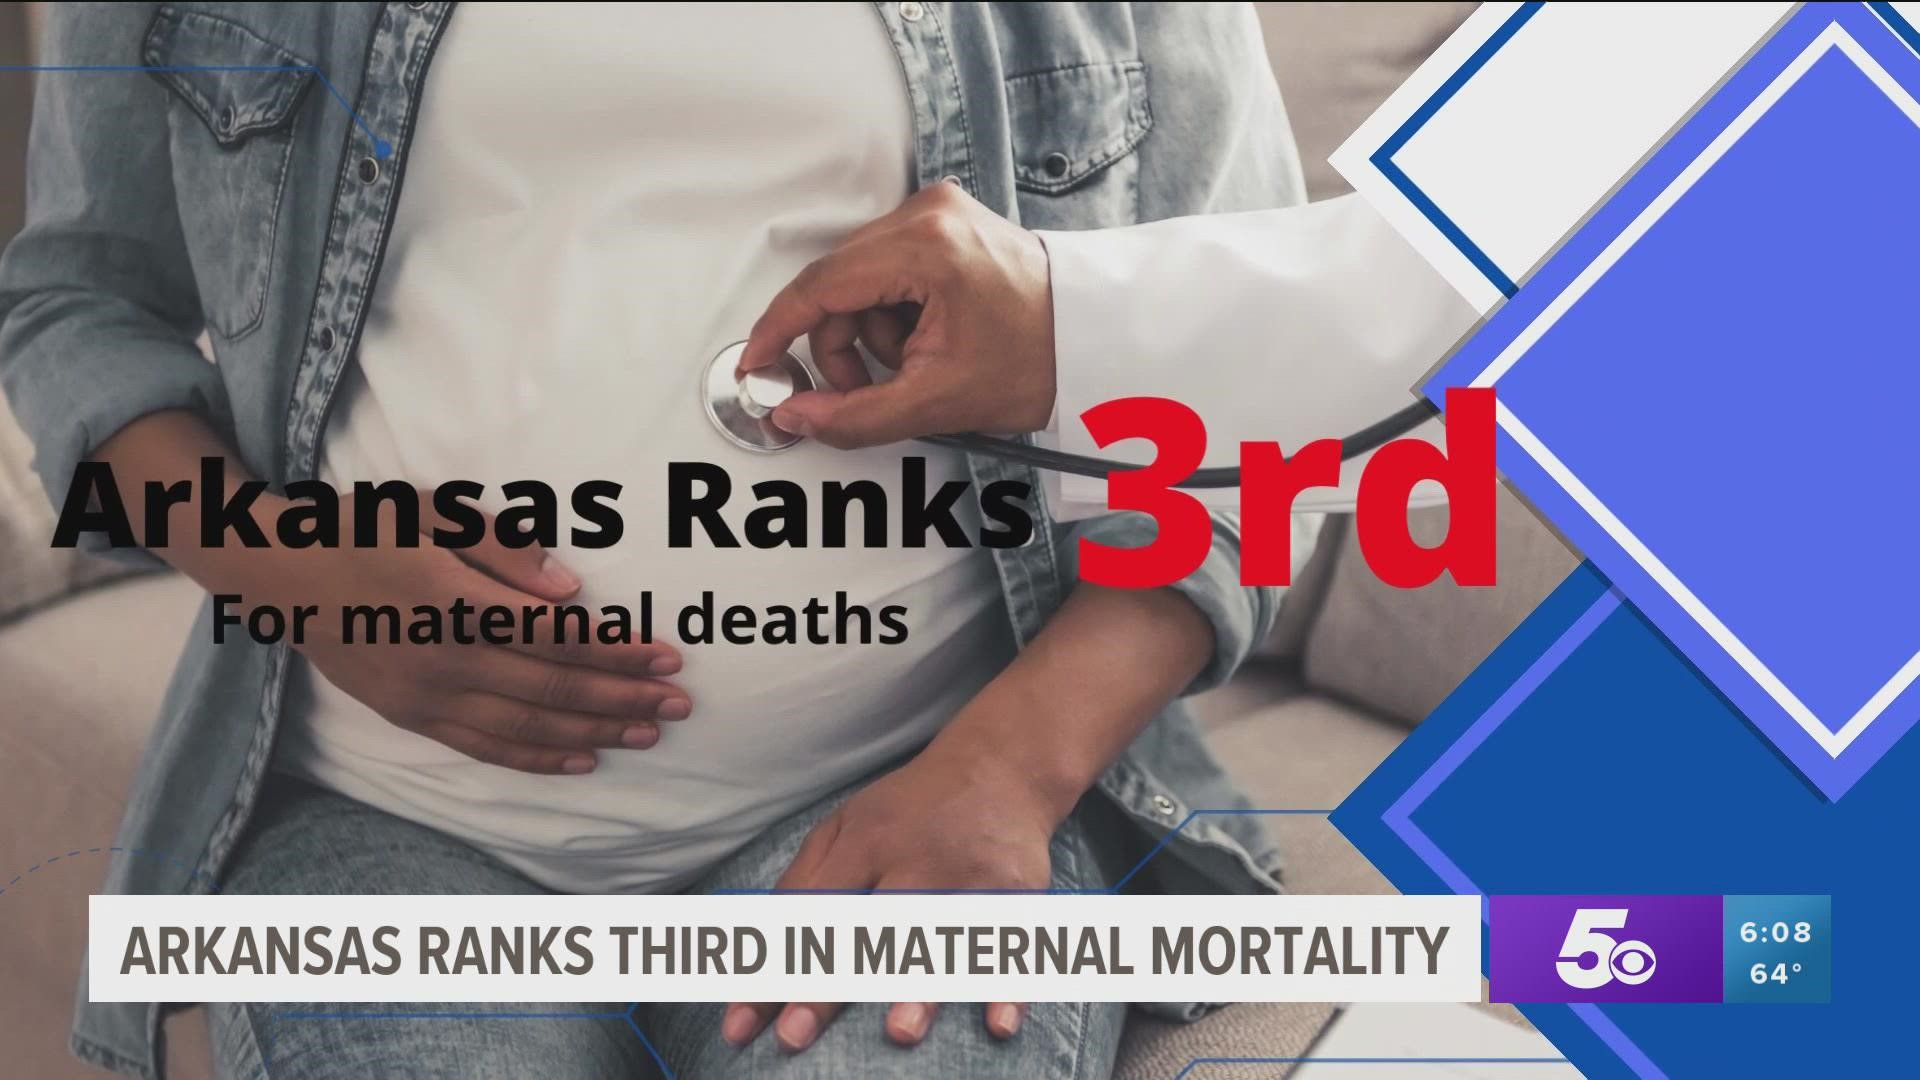 The report shows that in 2018, Black women birthed 19% of Arkansas' babies and made up 37% of the pregnancy-related deaths in Arkansas.